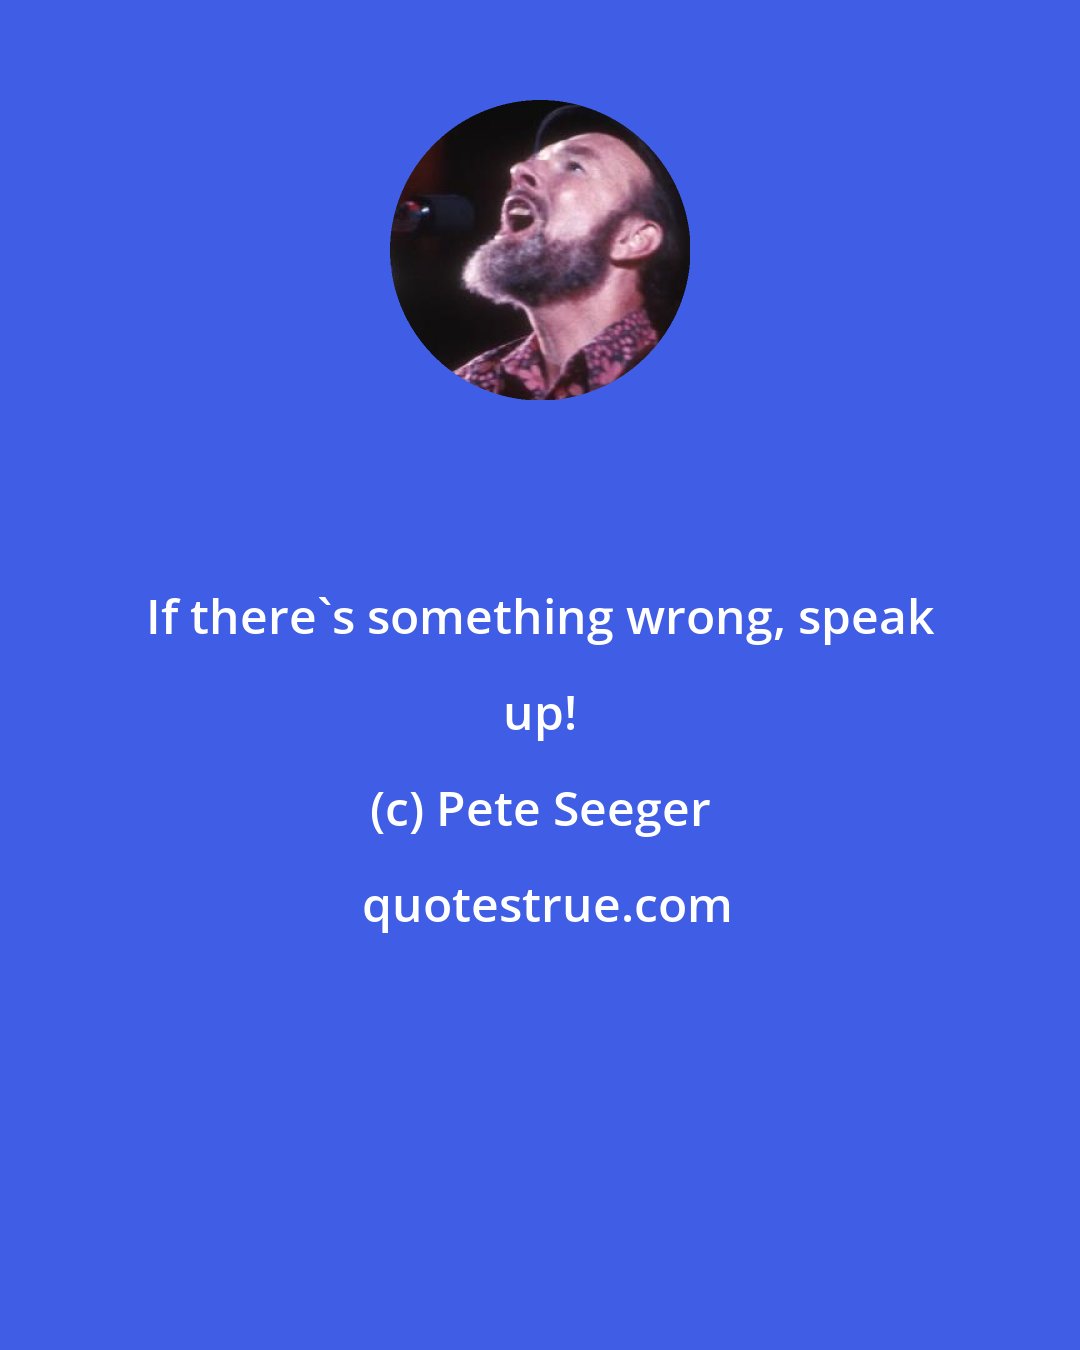 Pete Seeger: If there's something wrong, speak up!